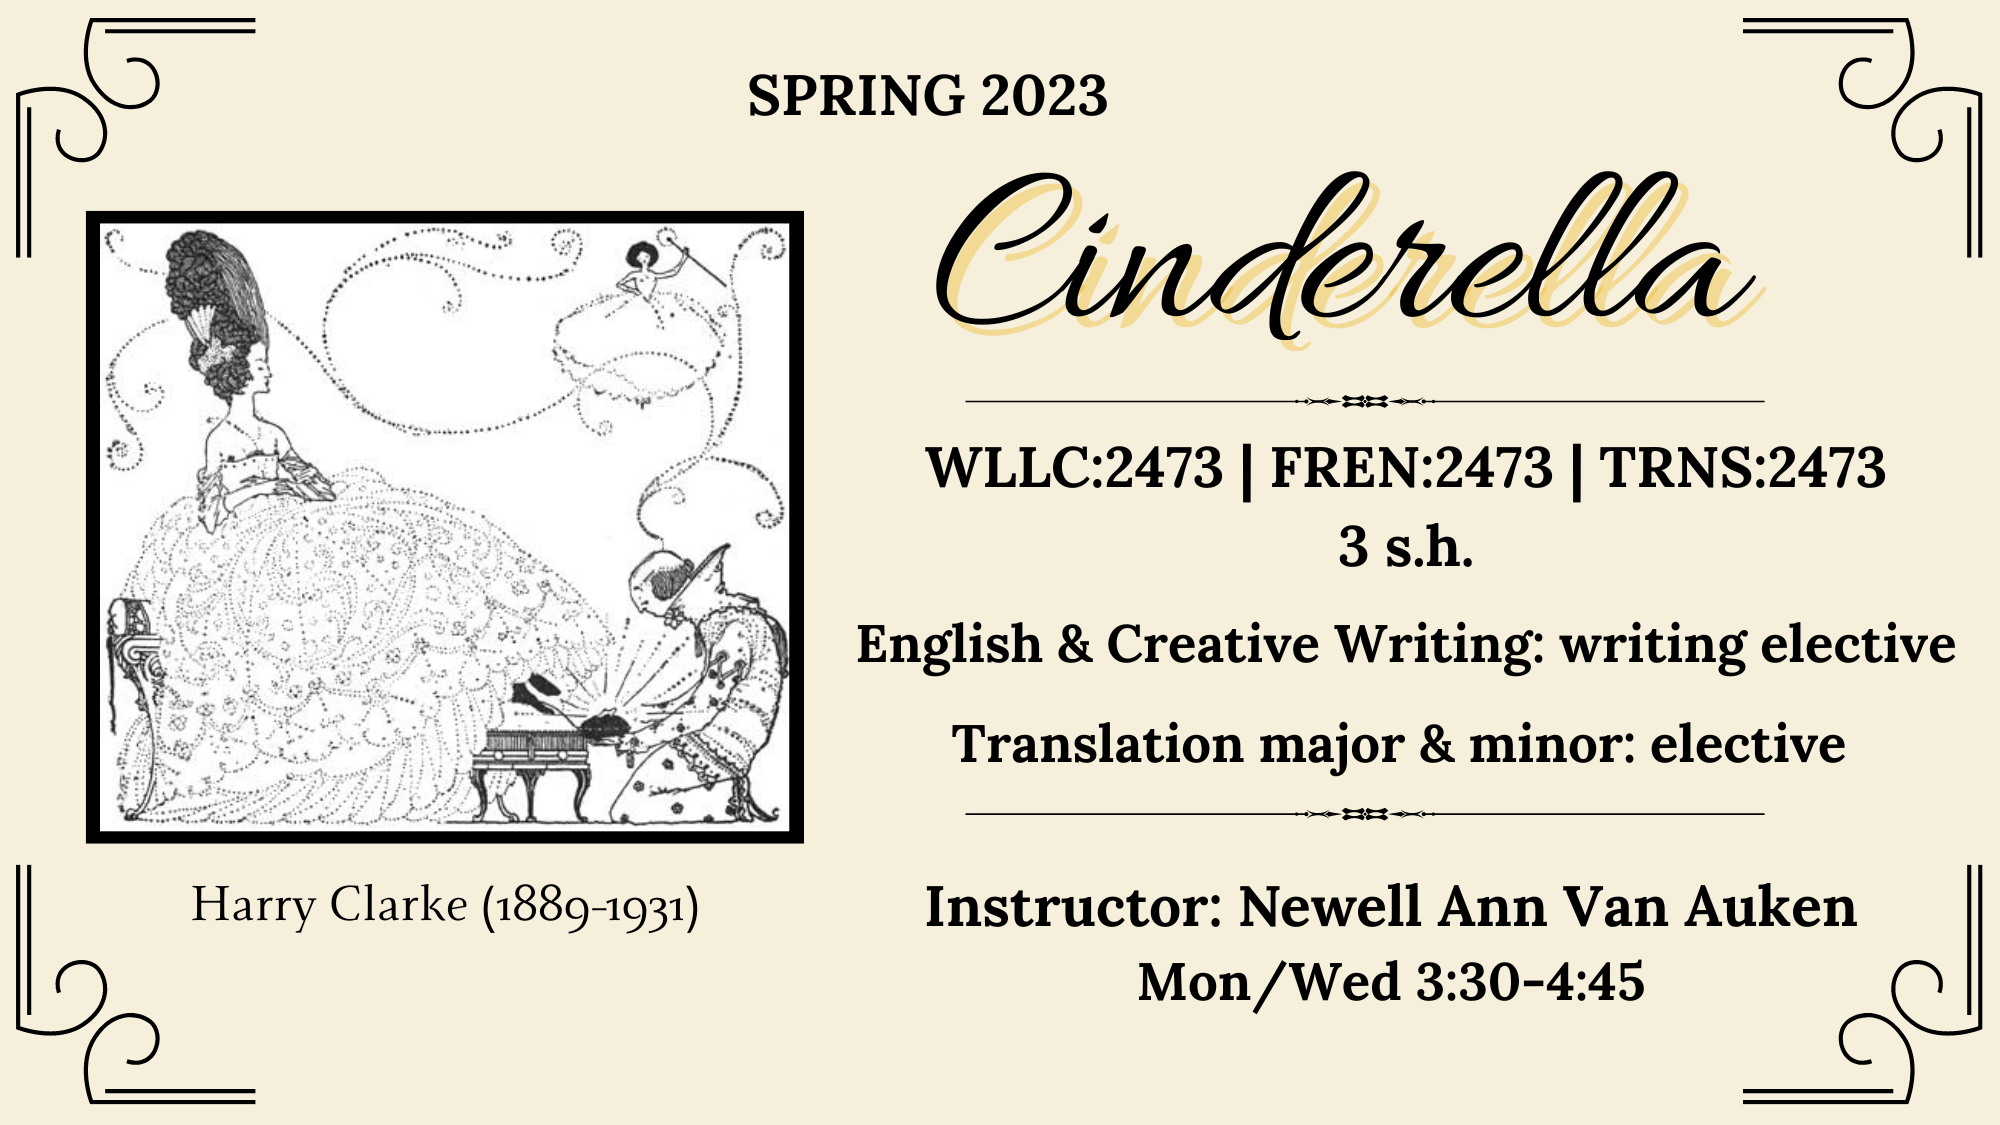 announcement for a course called "Cinderella" for the Spring 2023 semester; includes an artistic depiction from the Cinderella story